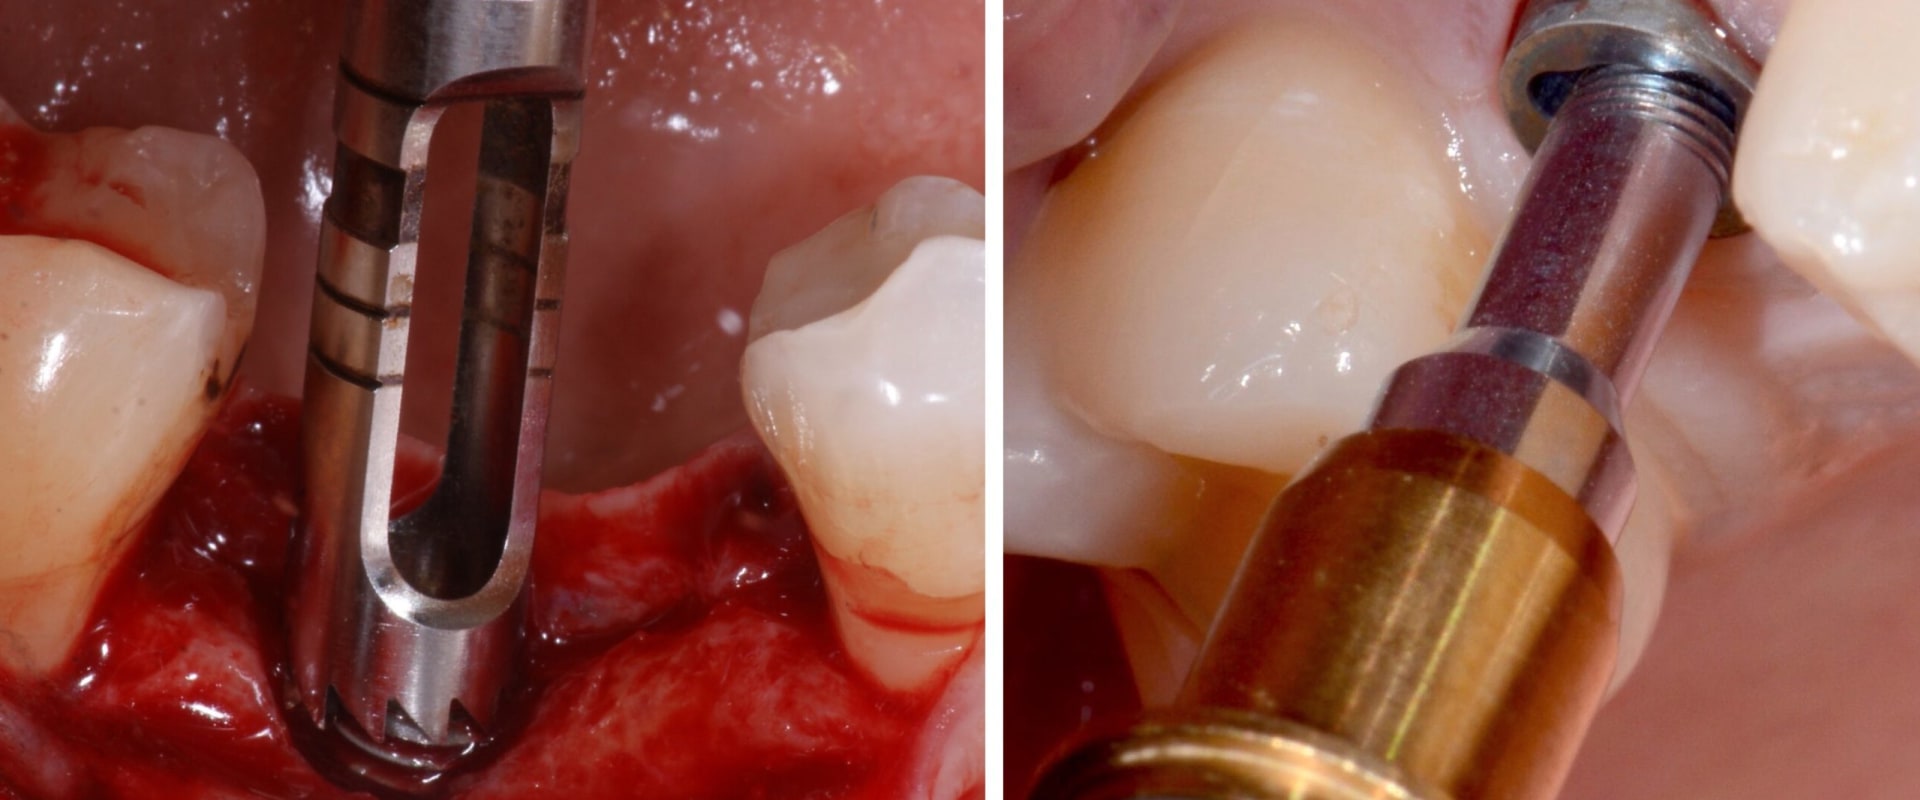 When to remove the dental implant?